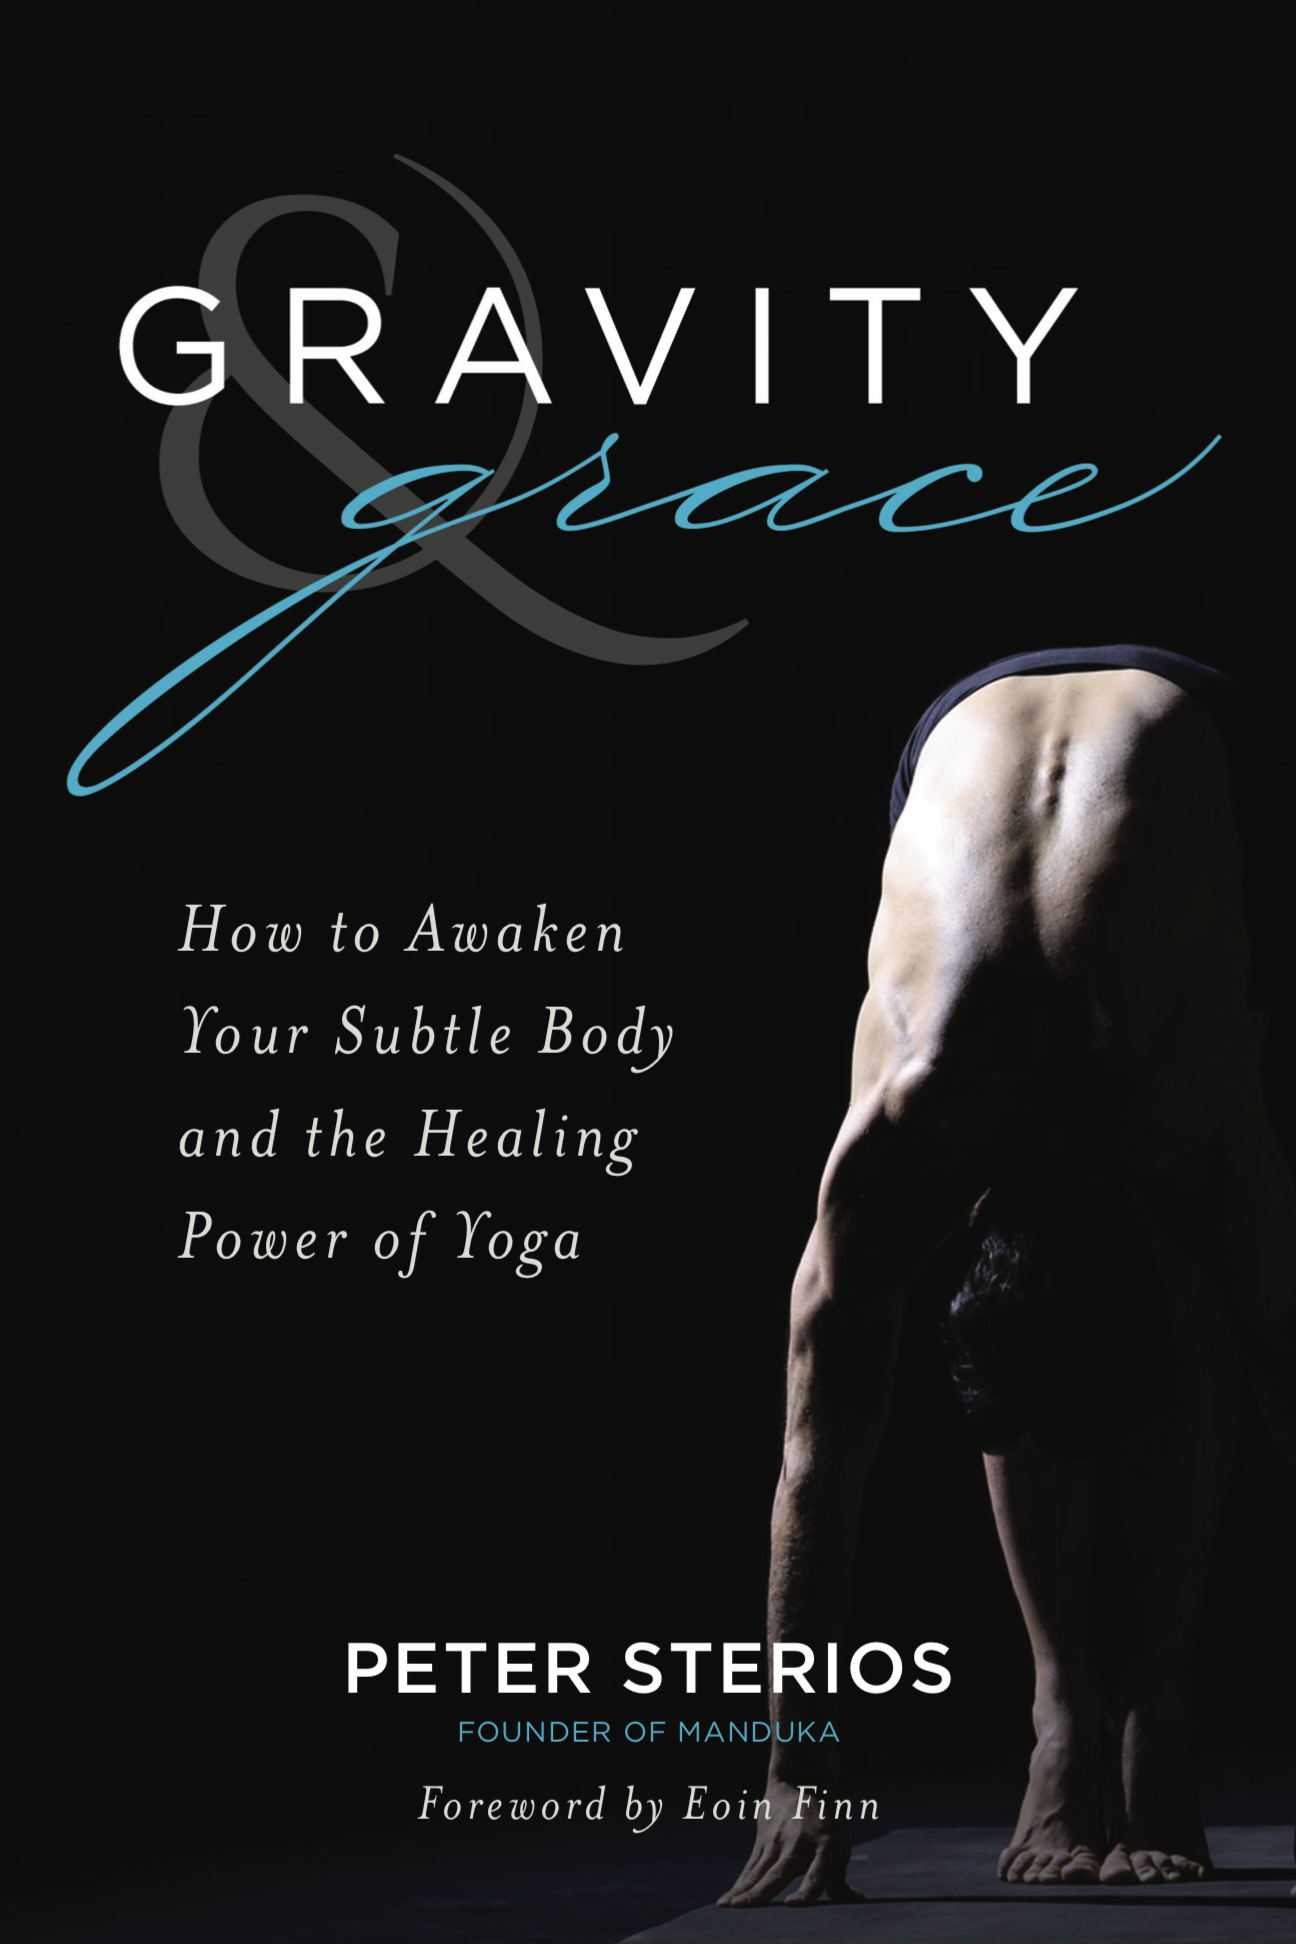 Photo of male body in yoga pose with stylized book title, subtitle, and author's name.